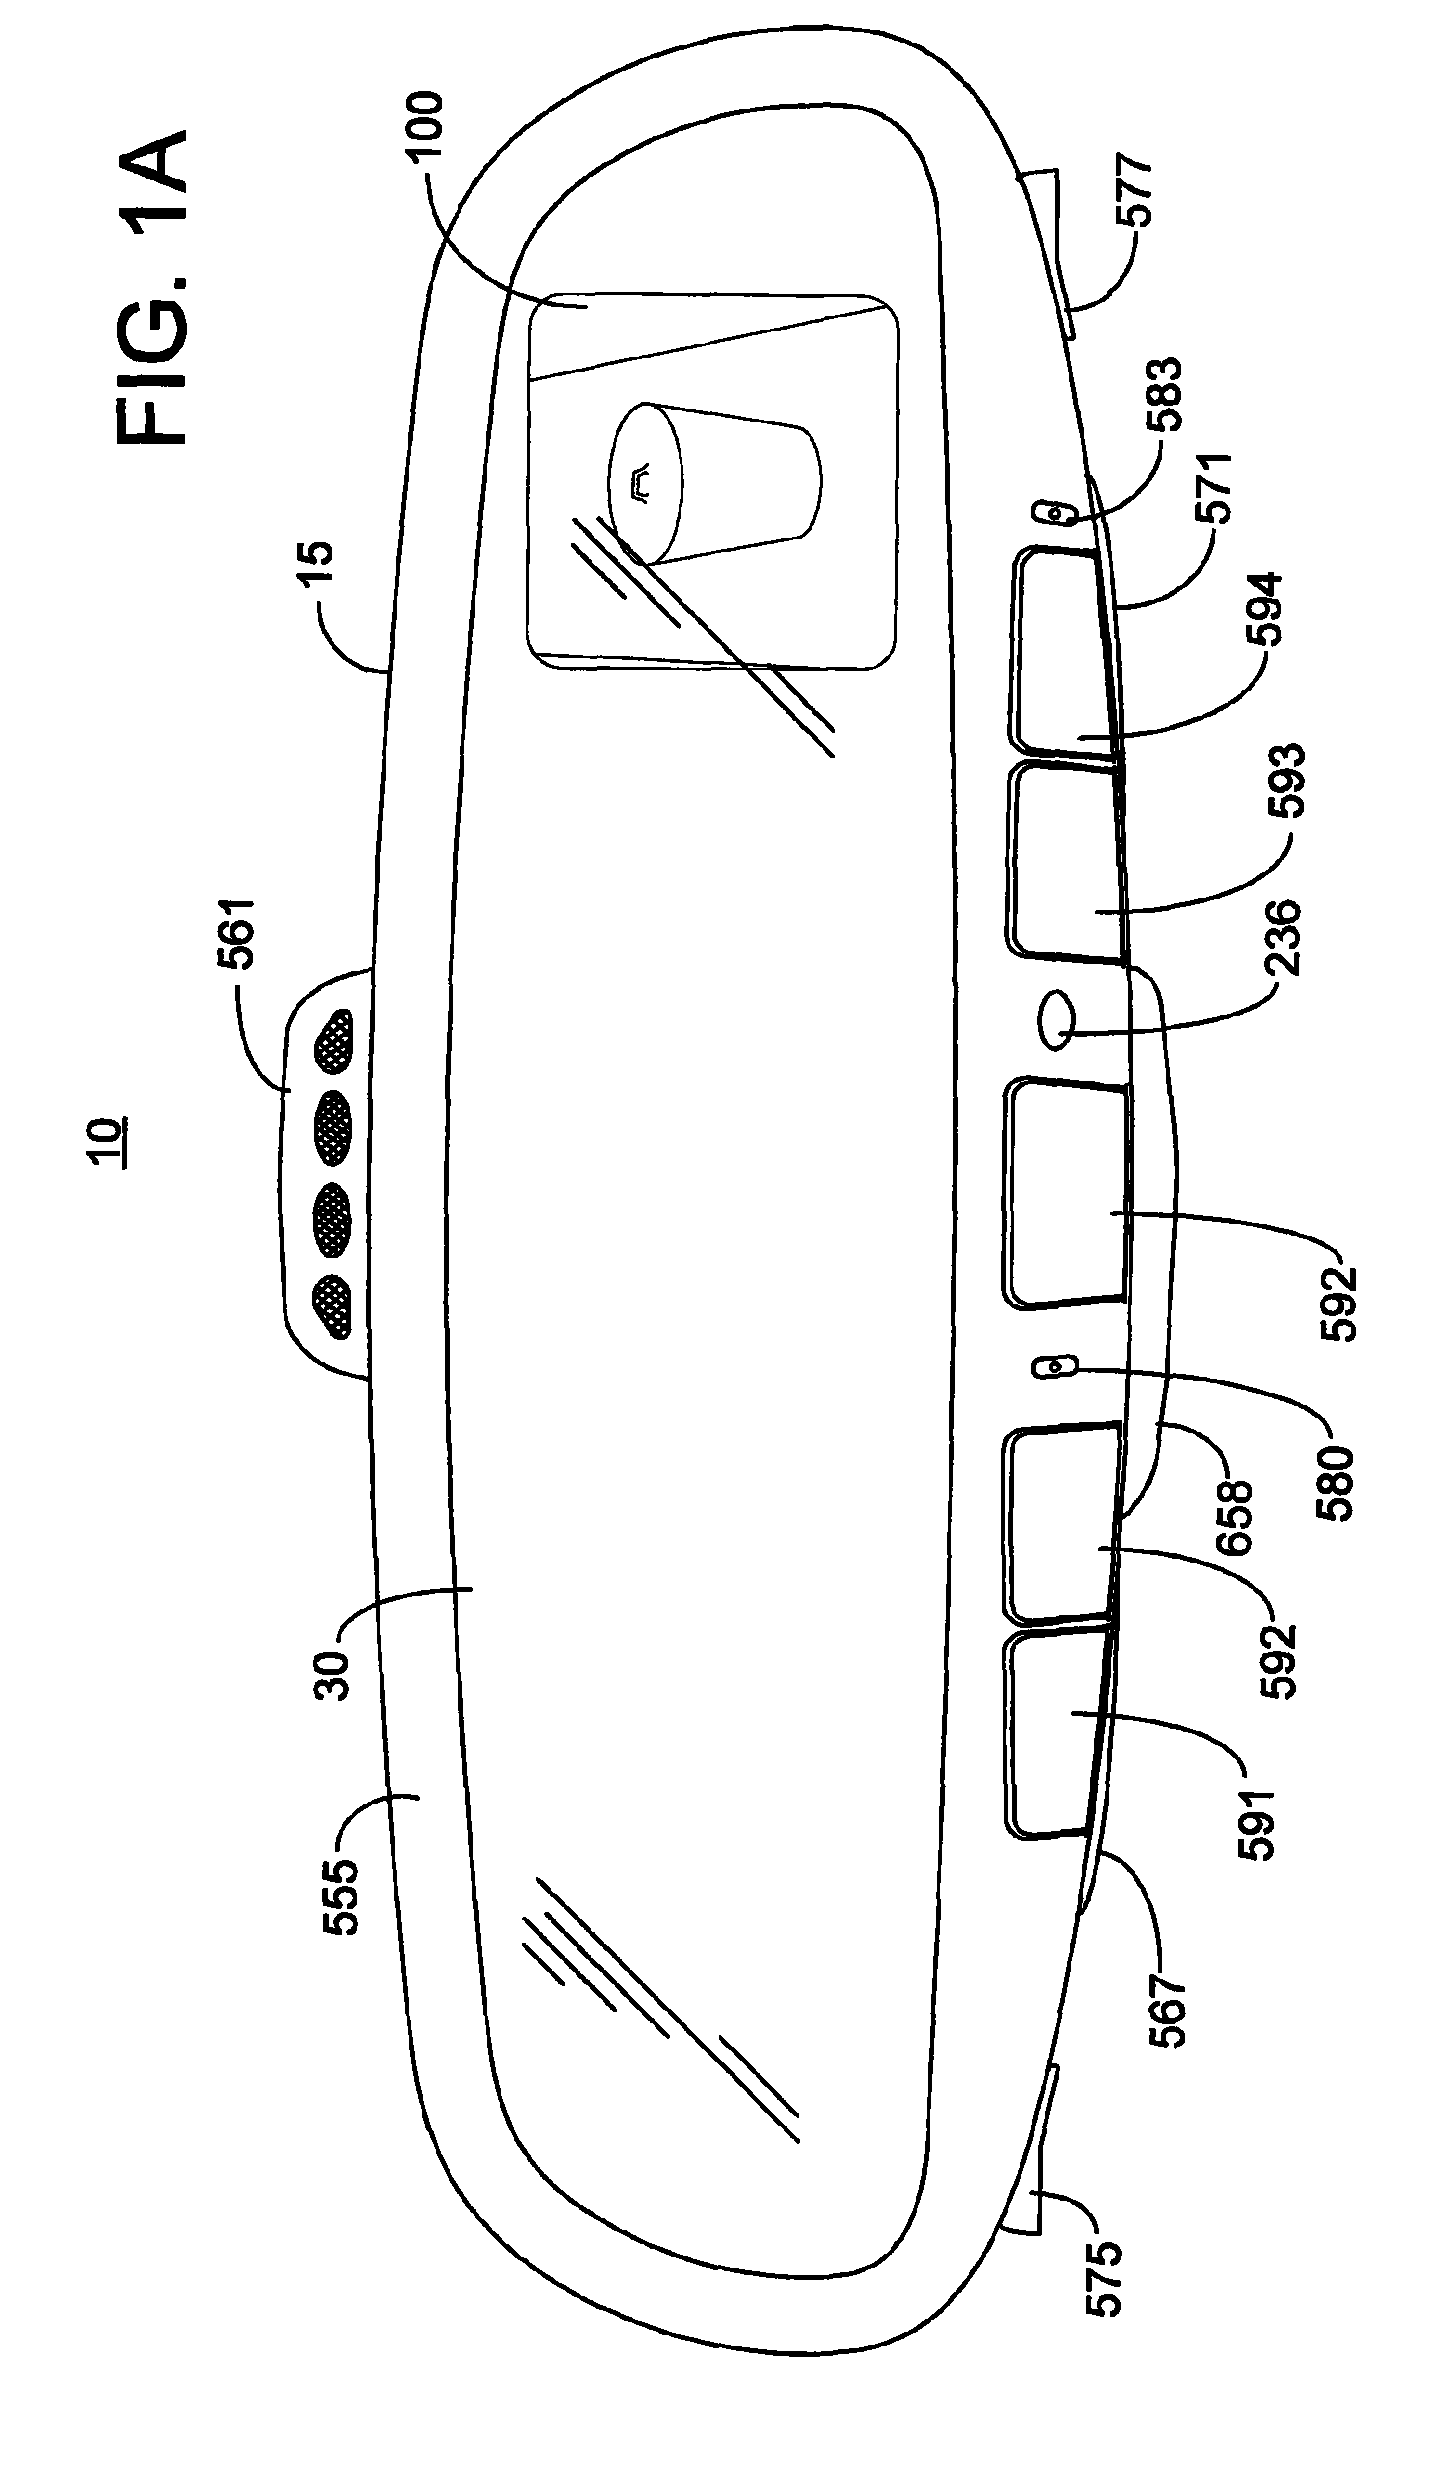 Vehicle rearview mirror assembly including a high intensity display